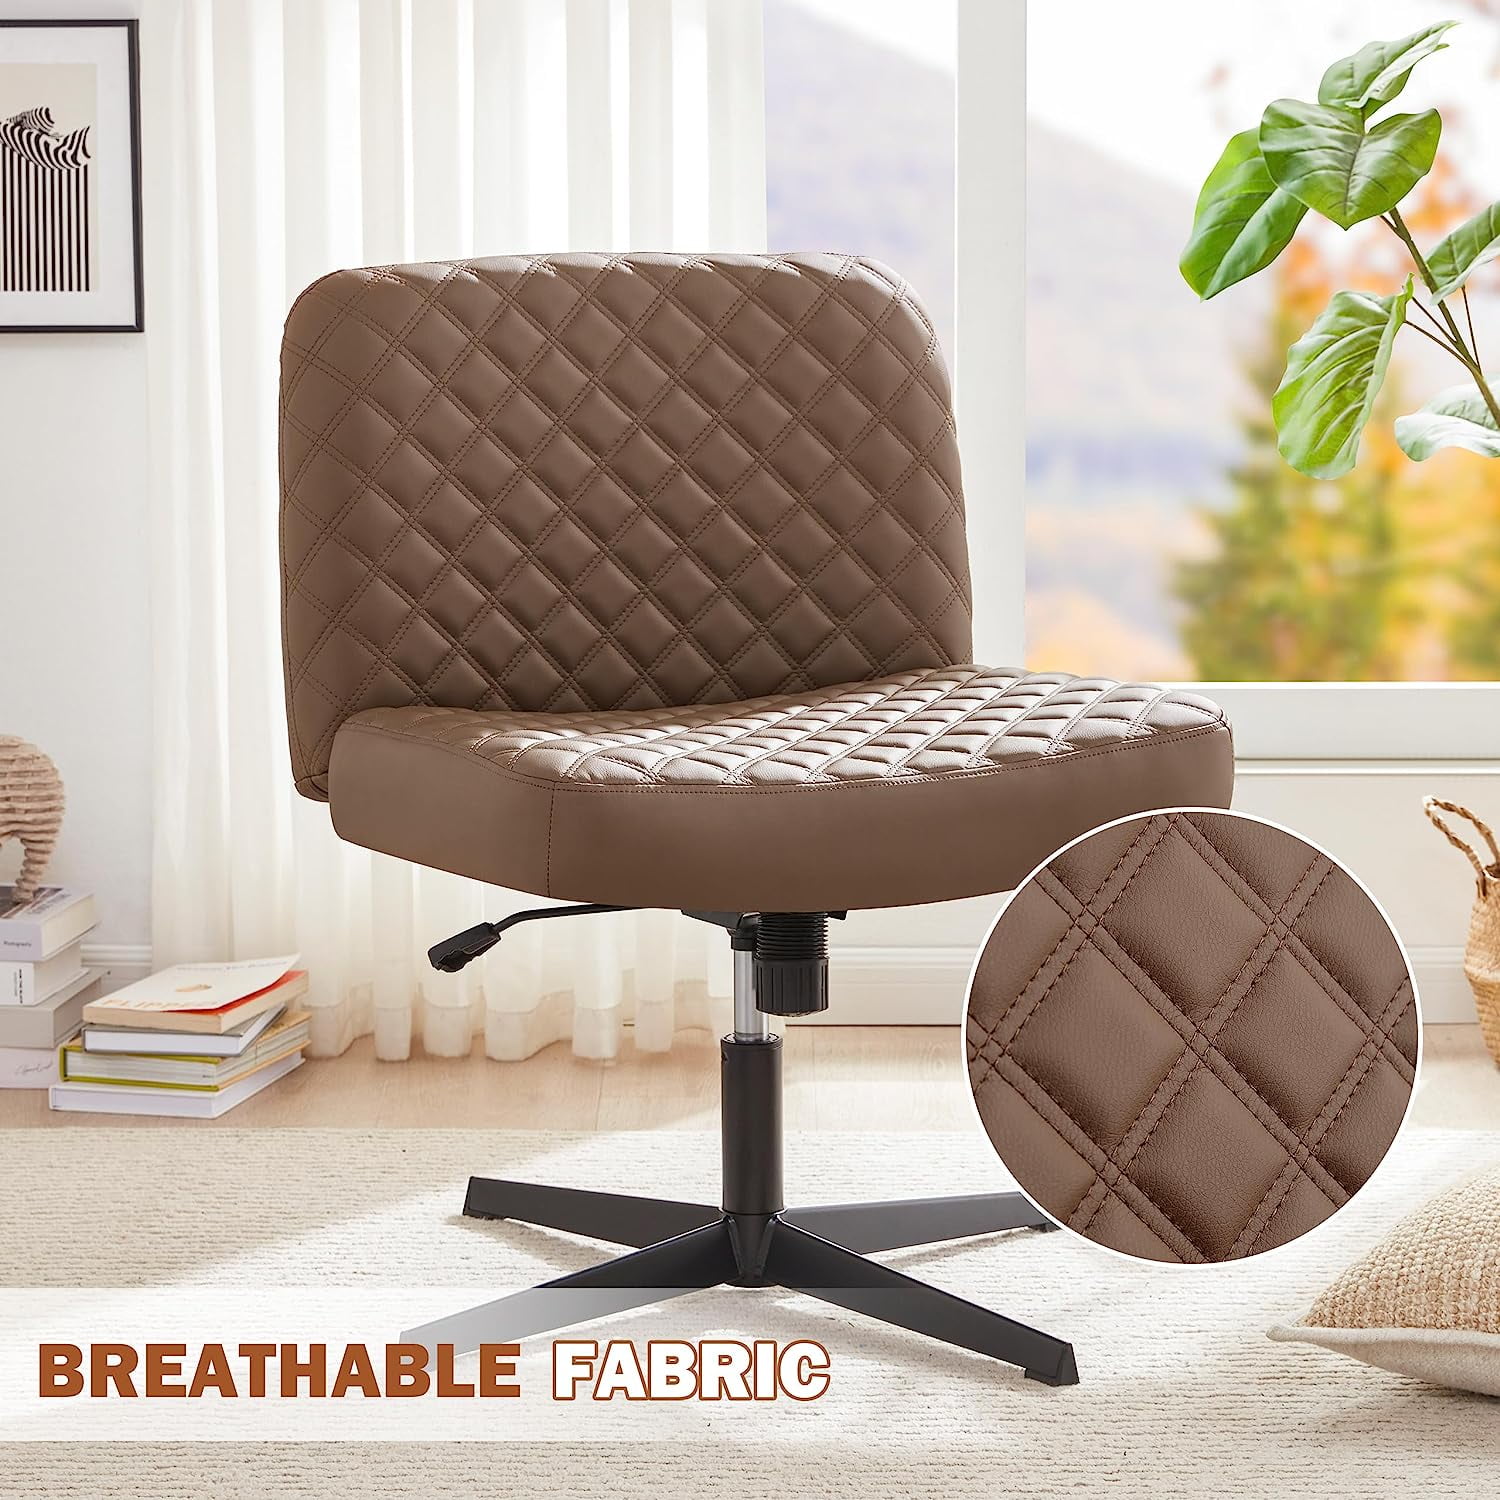 Weture Armless Office Desk Chair, Cross Legged Chair No Wheels, Thickened Wide Seat Office Chair, Padded Comfy Modern Desk Chair No Arms, Detachable 